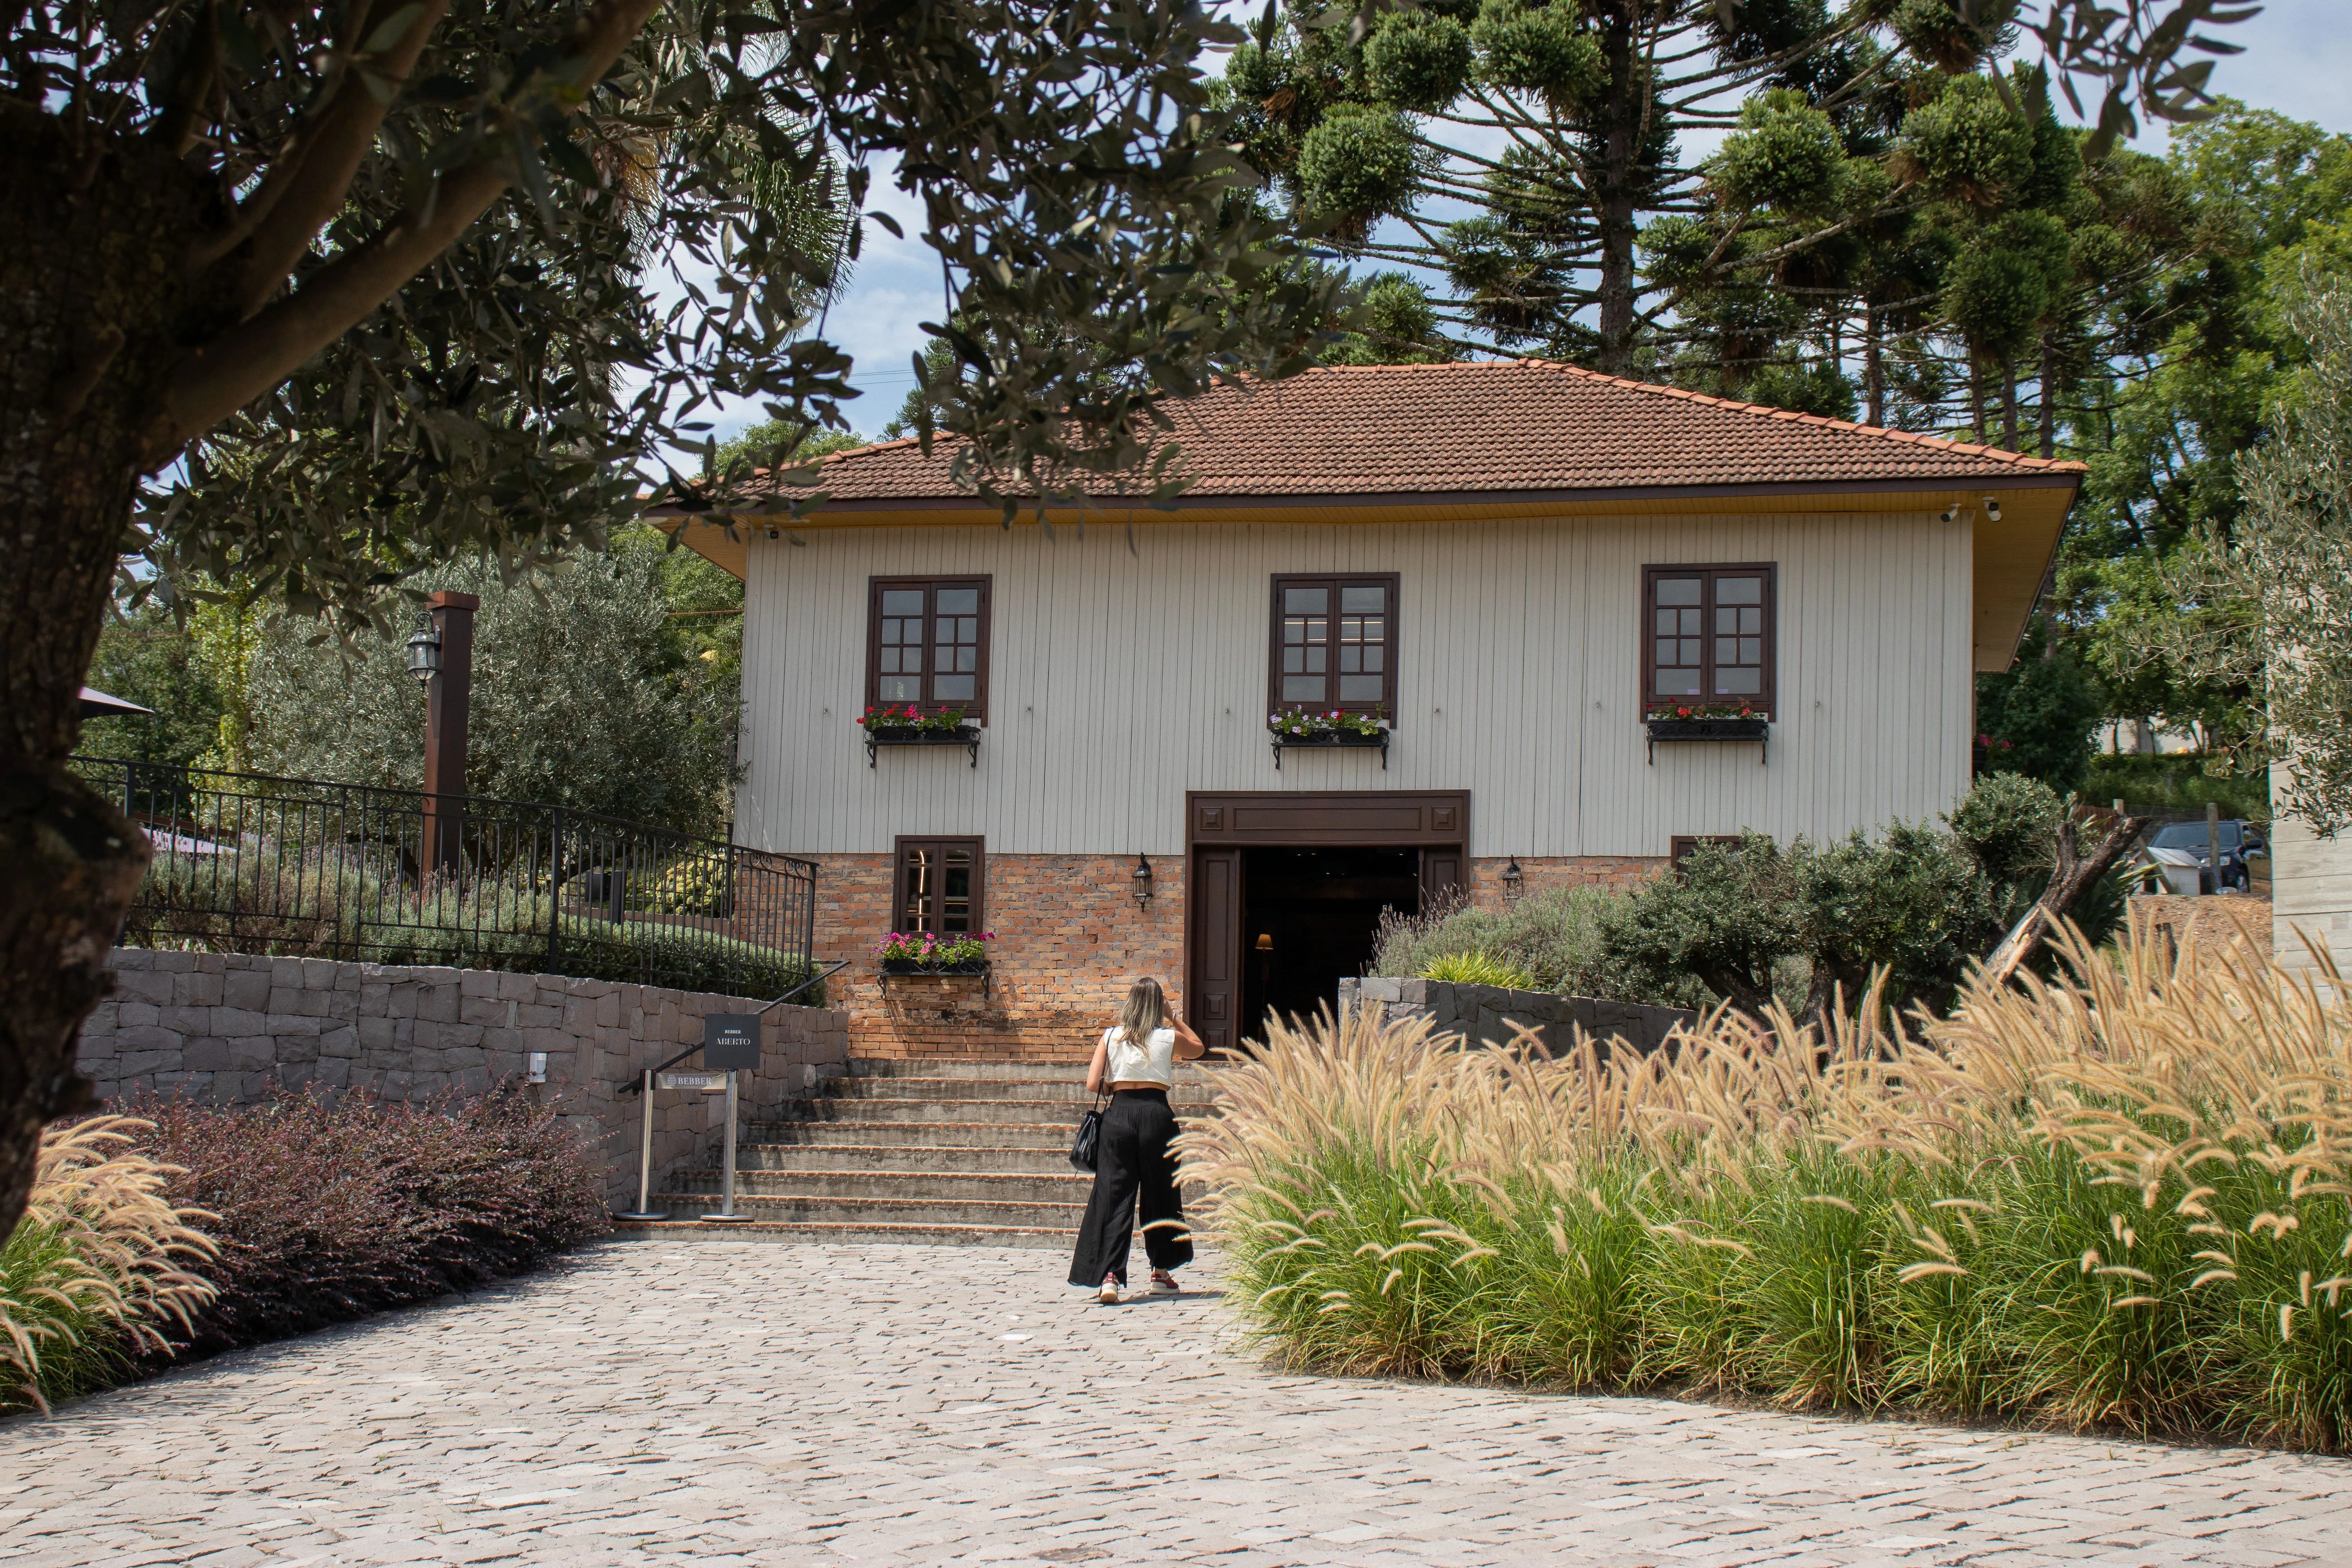 Family Bebber Winery in Brazil, South America | Wineries - Rated 0.9